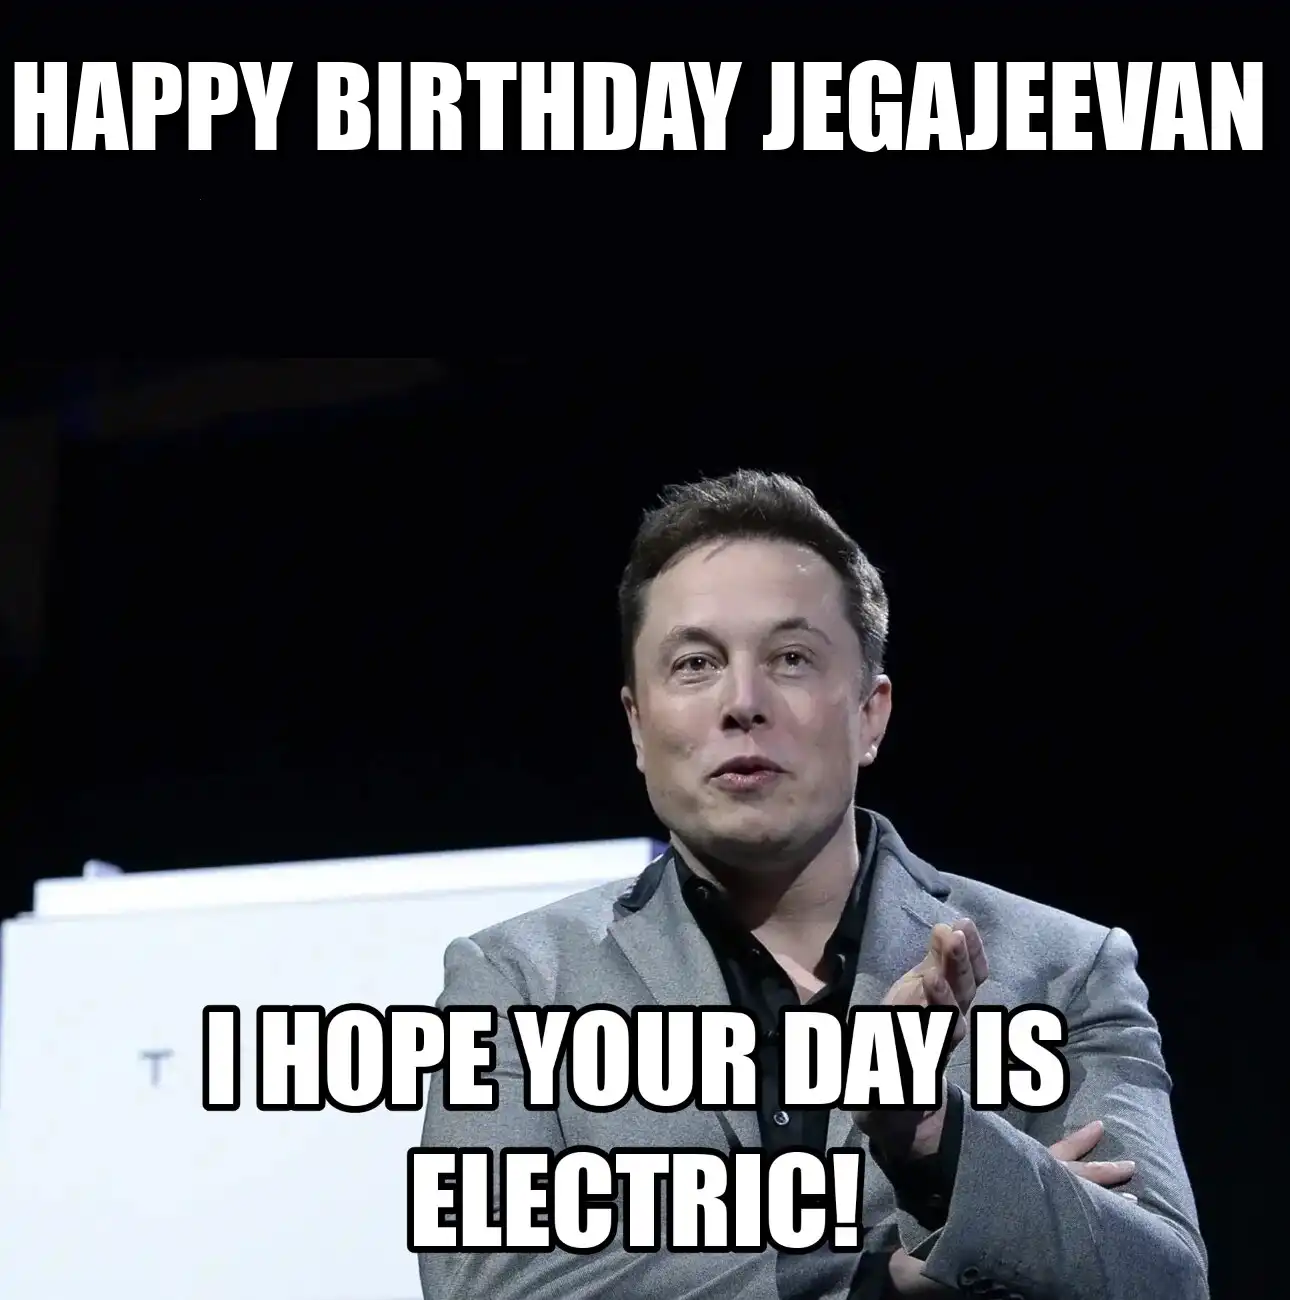 Happy Birthday Jegajeevan I Hope Your Day Is Electric Meme